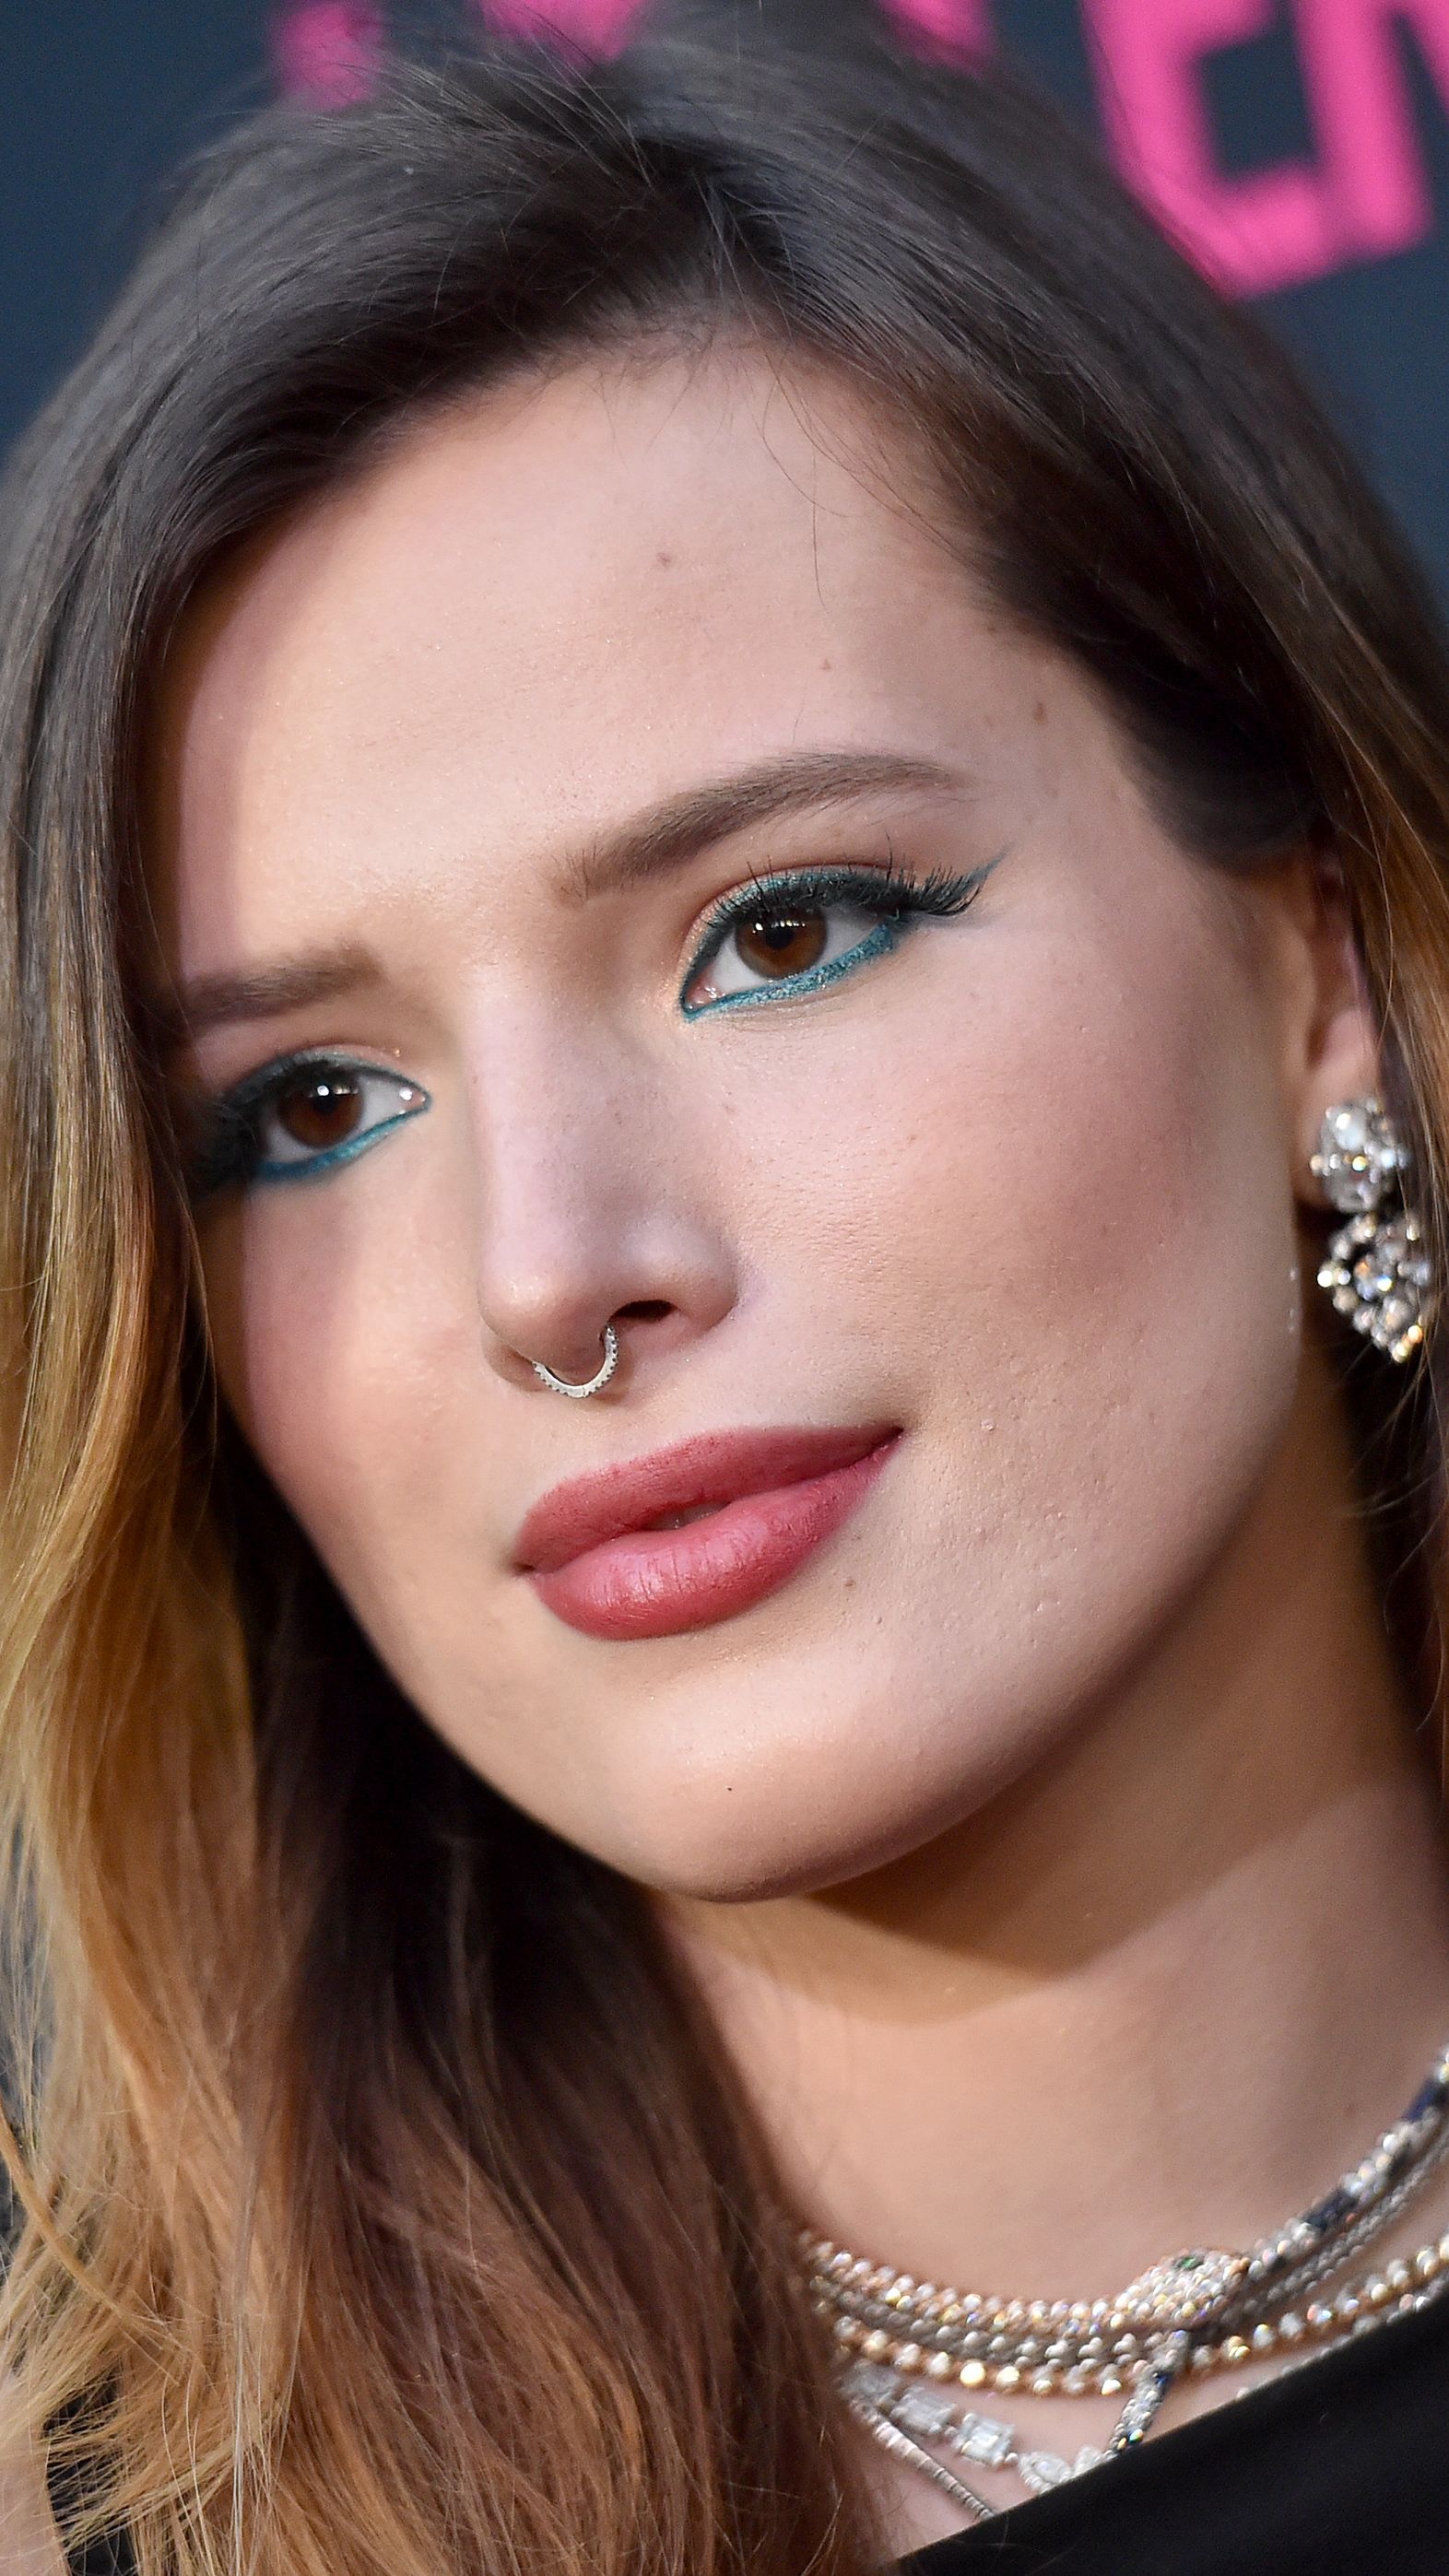 Bella Thorne Super Girl Porn - Bella Thorne Directed an Adult Film for Pornhub â€” These Are the Details |  Allure